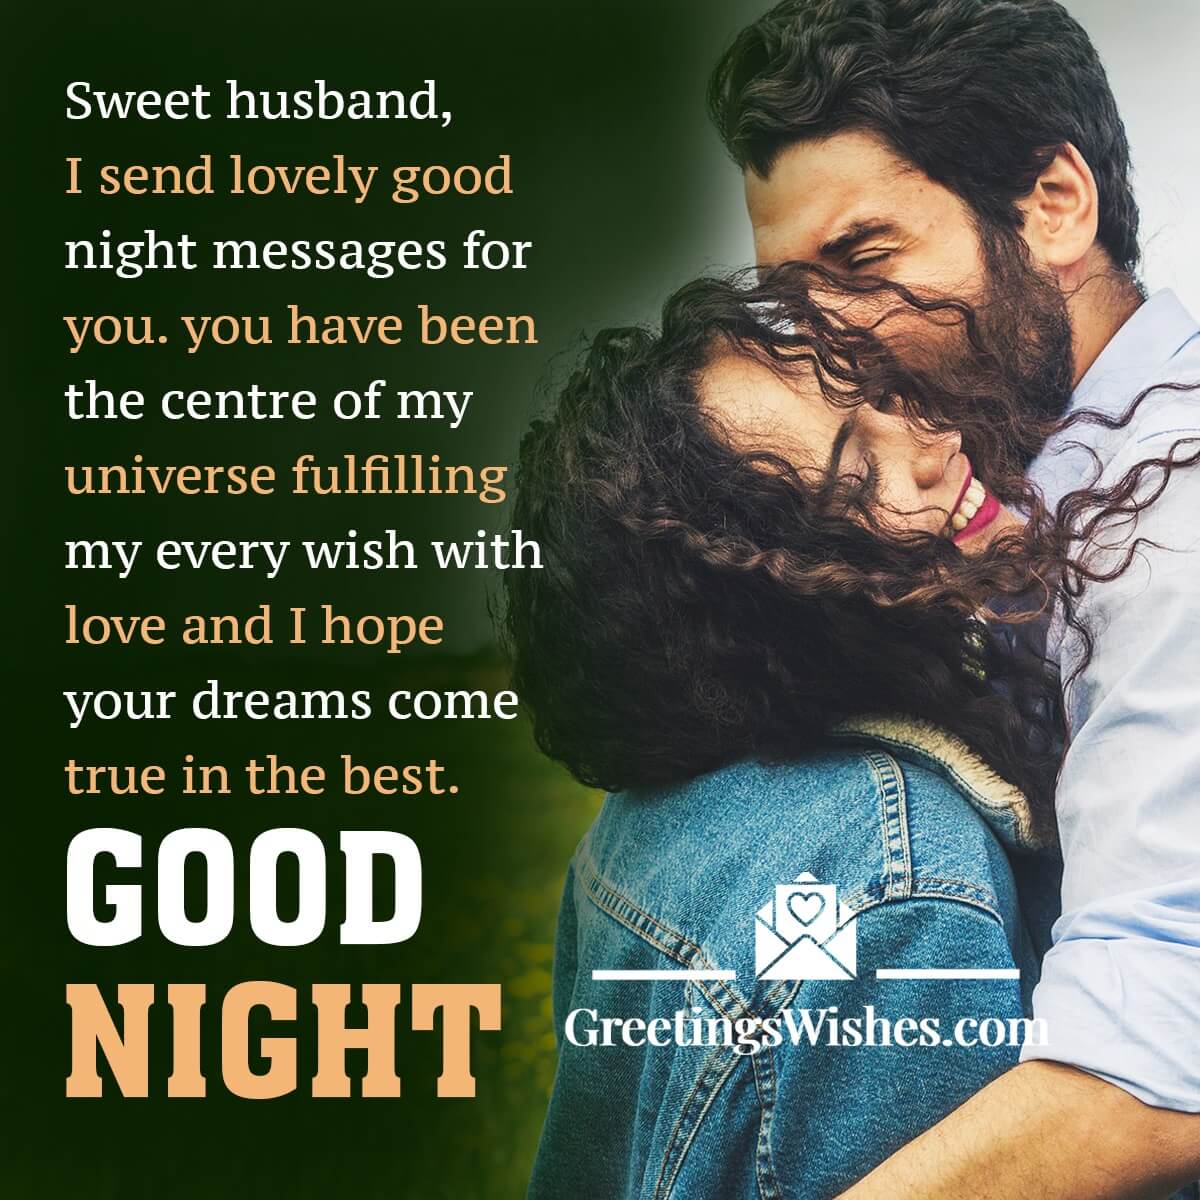 Good Night Wishes Messages to Husband - Greetings Wishes